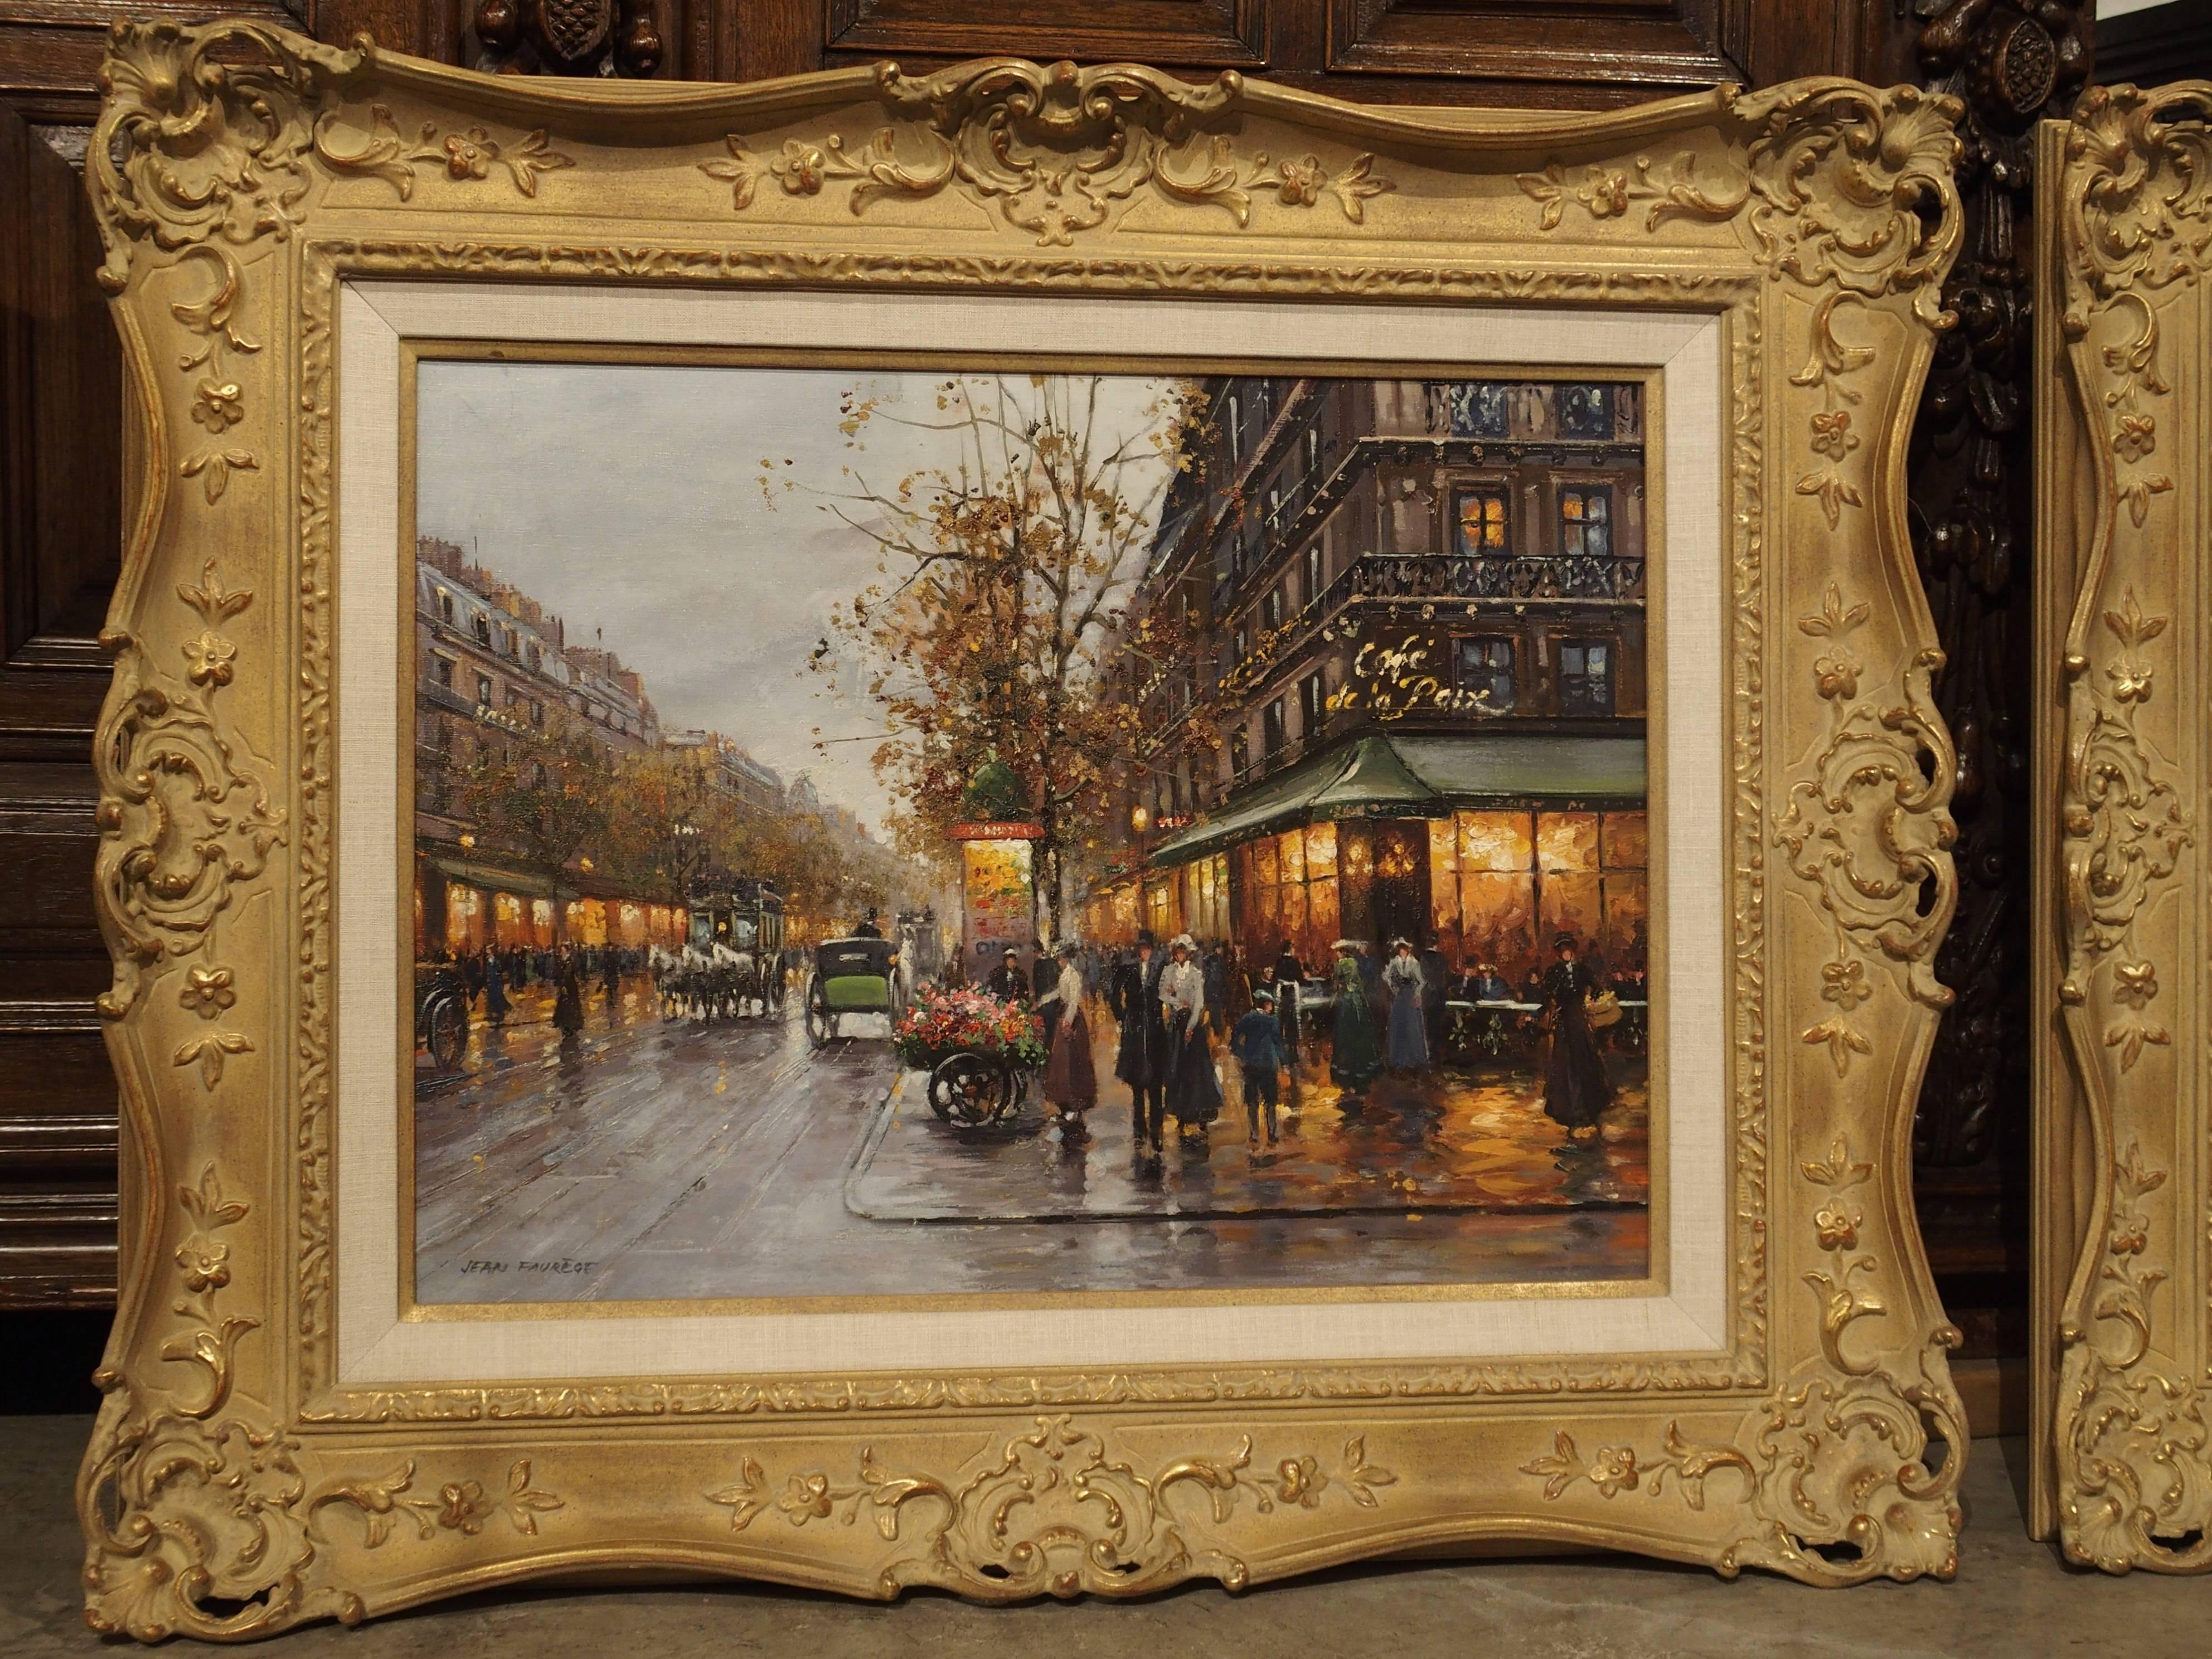 These elegant, framed oil paintings depict scenes of 19th century Paris, France. Glistening early evening lights from shops and cafes highlight the wet streets from a recent rain on both paintings. People, horse drawn carriages, flower carts and